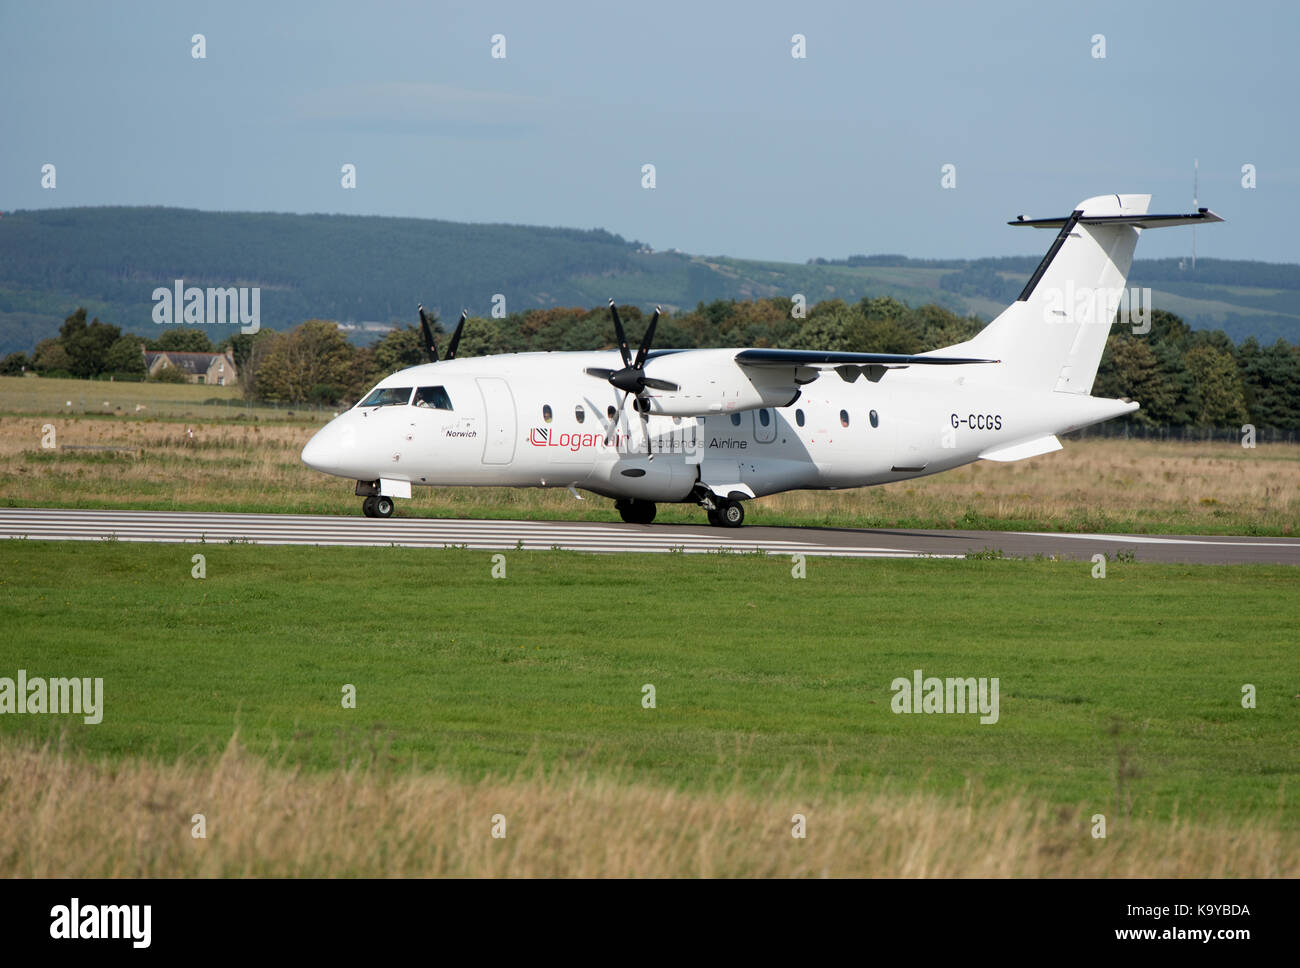 A Dornier 328-100 from the Loganair fleet, Scotland's Airline departing from Inverness on an internal flight. Stock Photo